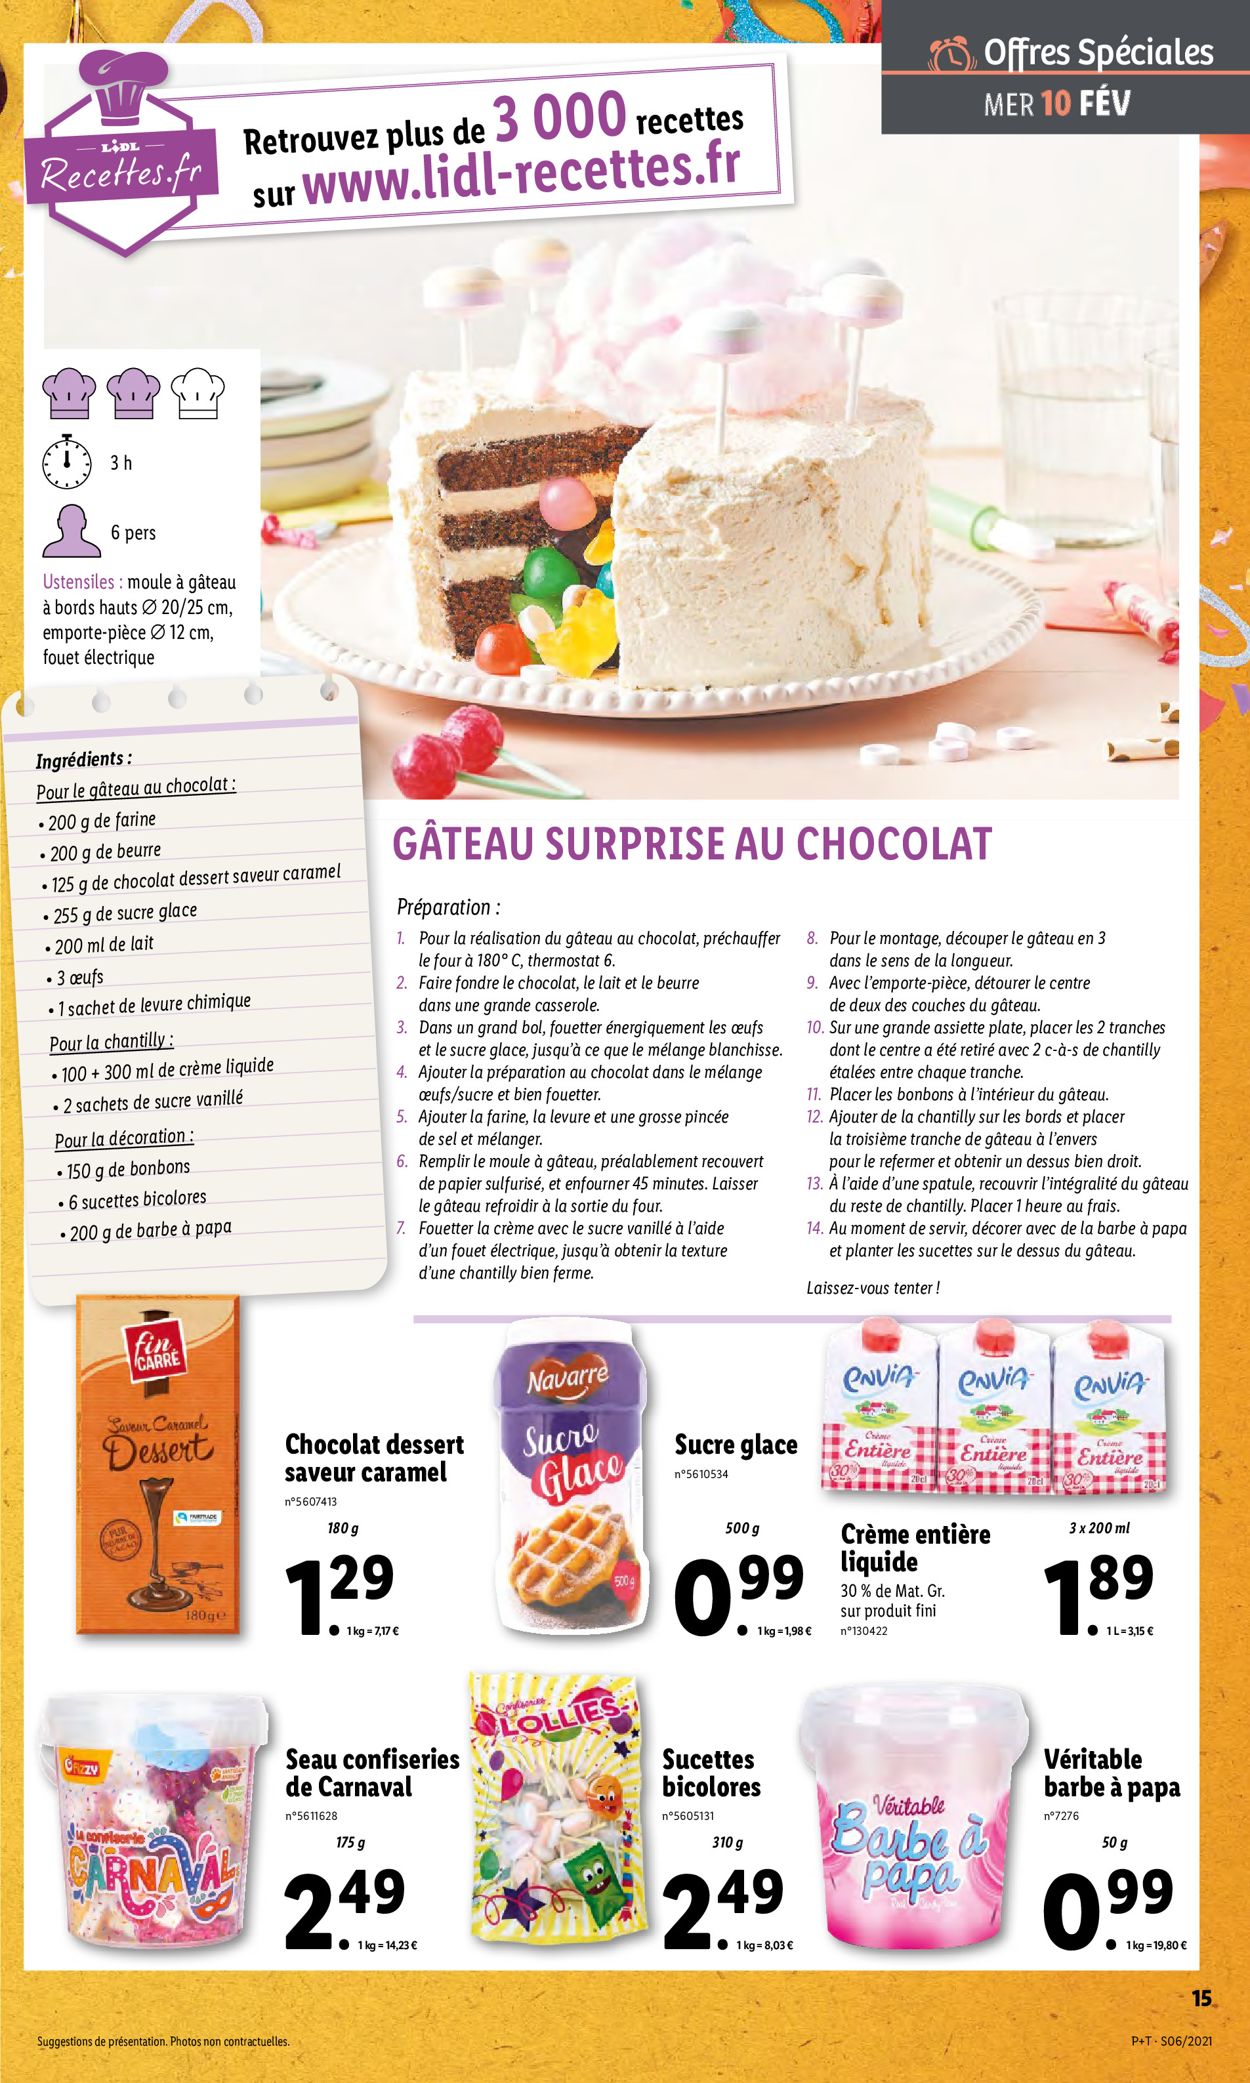 Lidl Catalogue - 10.02-16.02.2021 (Page 15)